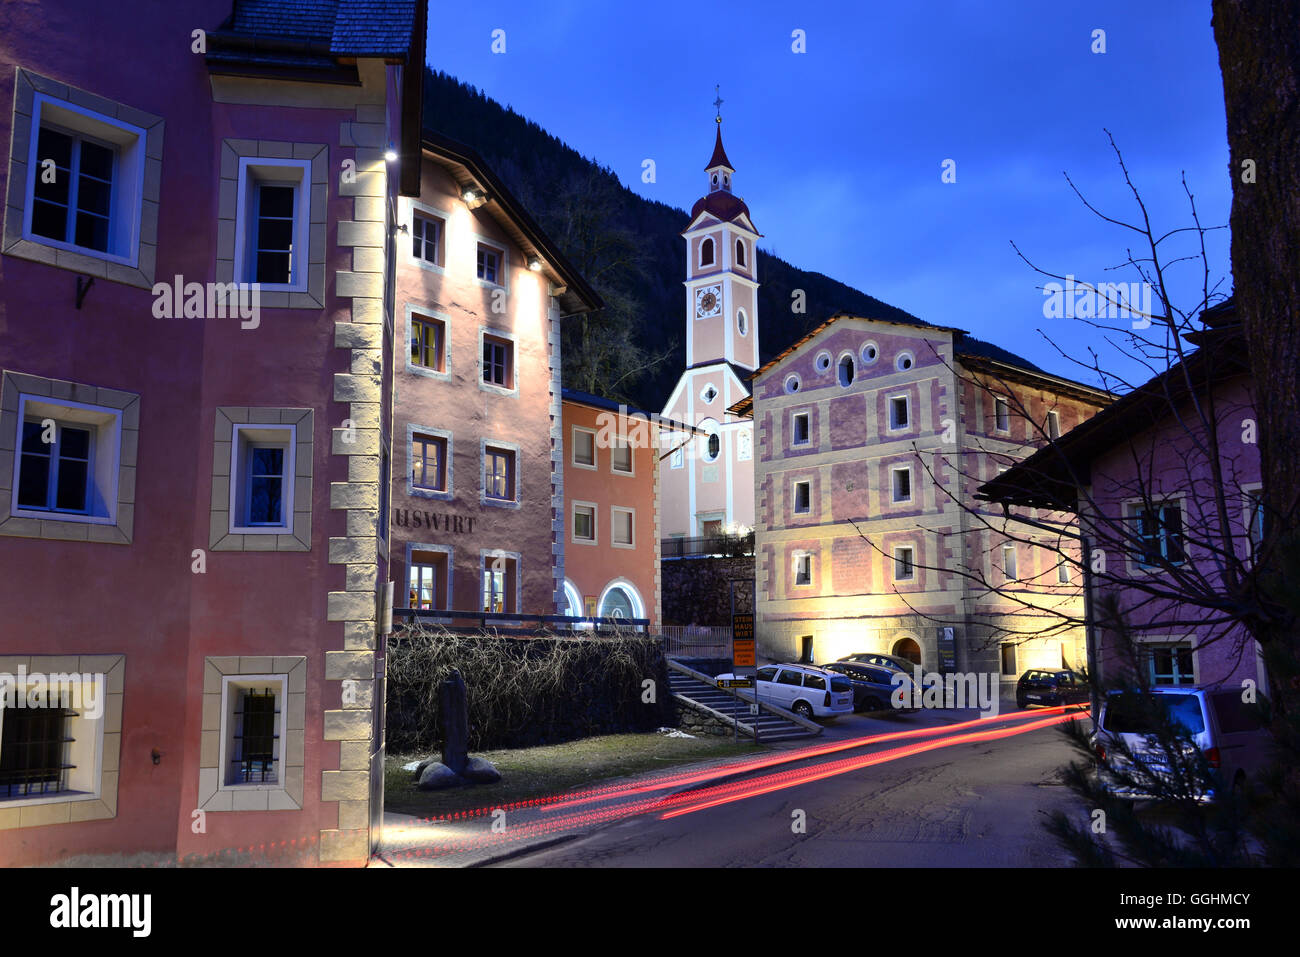 Village of Steinhaus in the Ahrn valley, South Tyrol, Italy Stock Photo